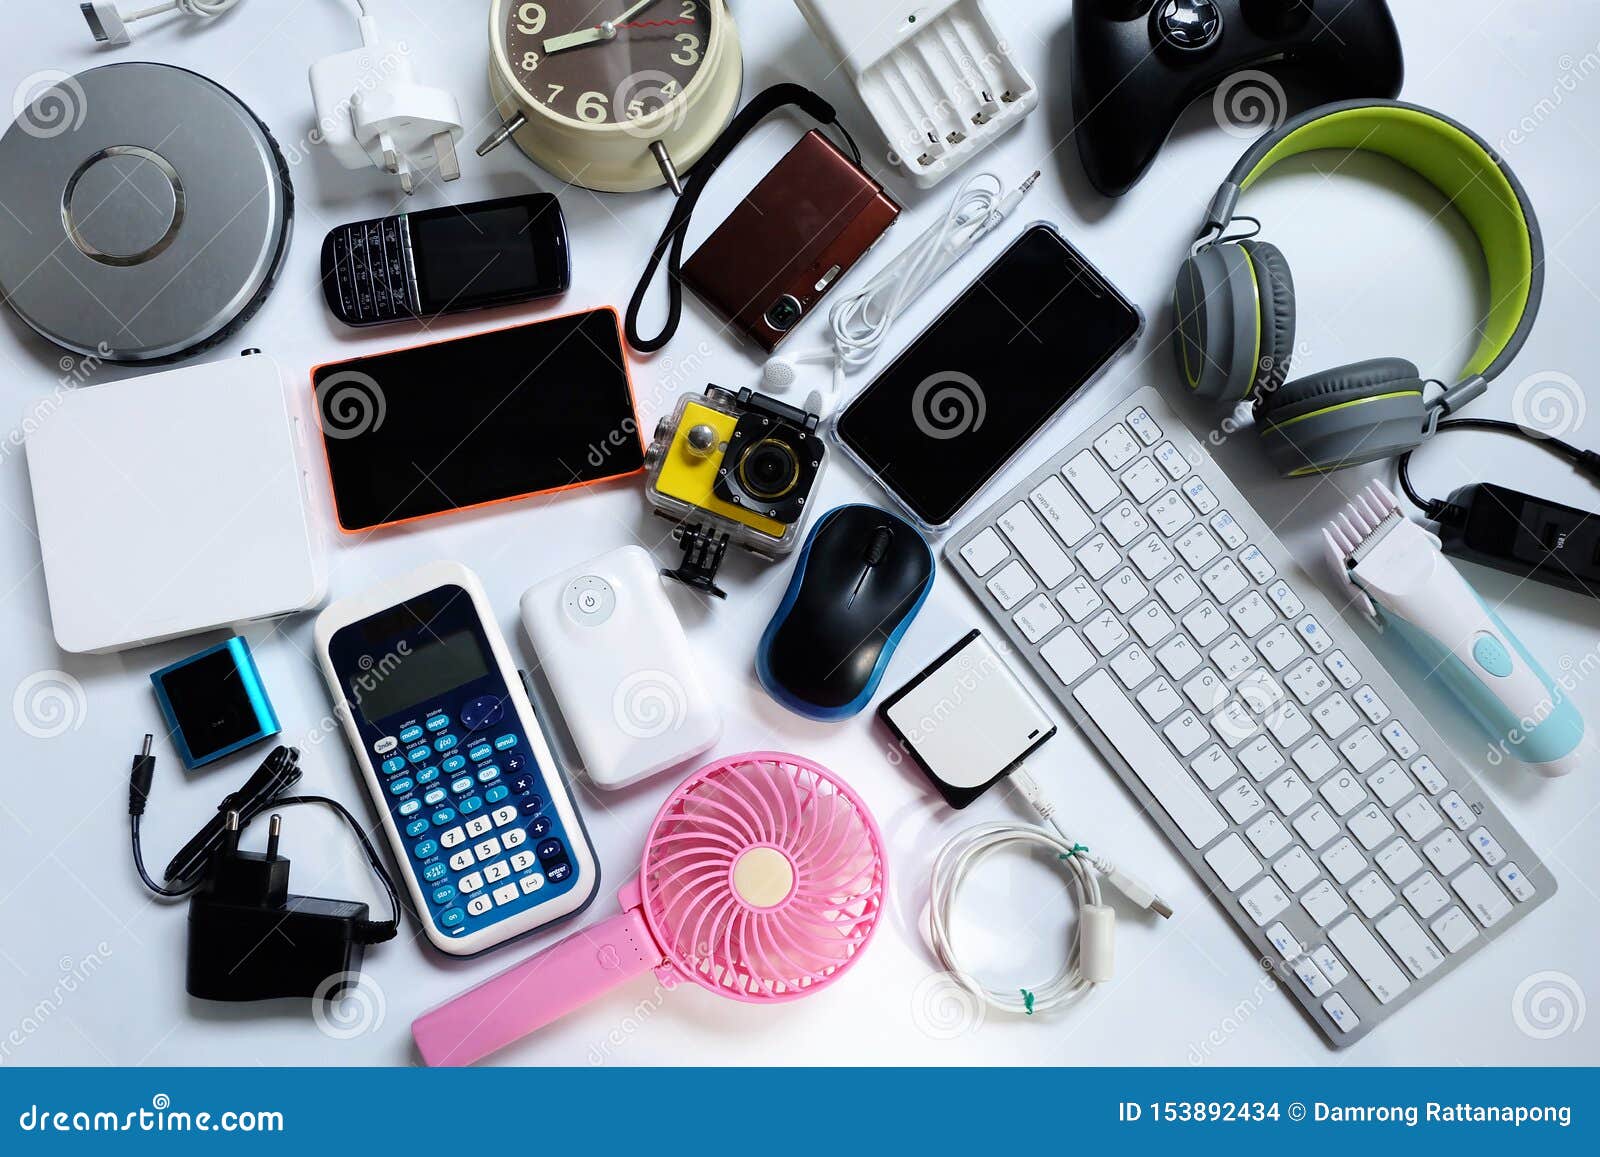 Many Used Modern Electronic Gadgets for daily Use on White Floor, Reuse and  Recycle Concept Stock Photo - Image of modern, accessories: 153892434